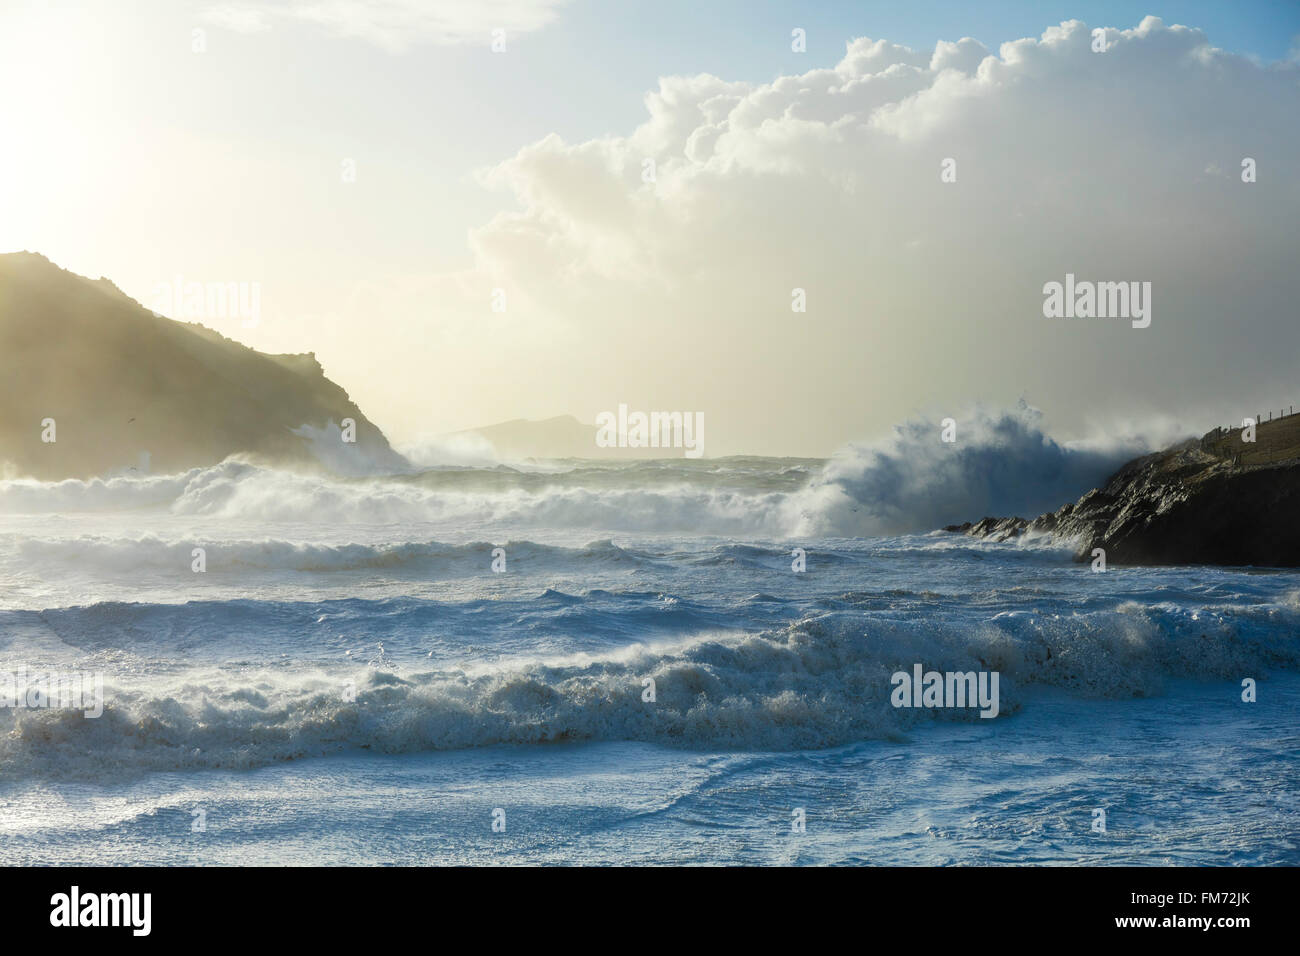 Storm waves breaking in Clogher Bay, Dingle Peninsula, County Kerry, Ireland. Stock Photo